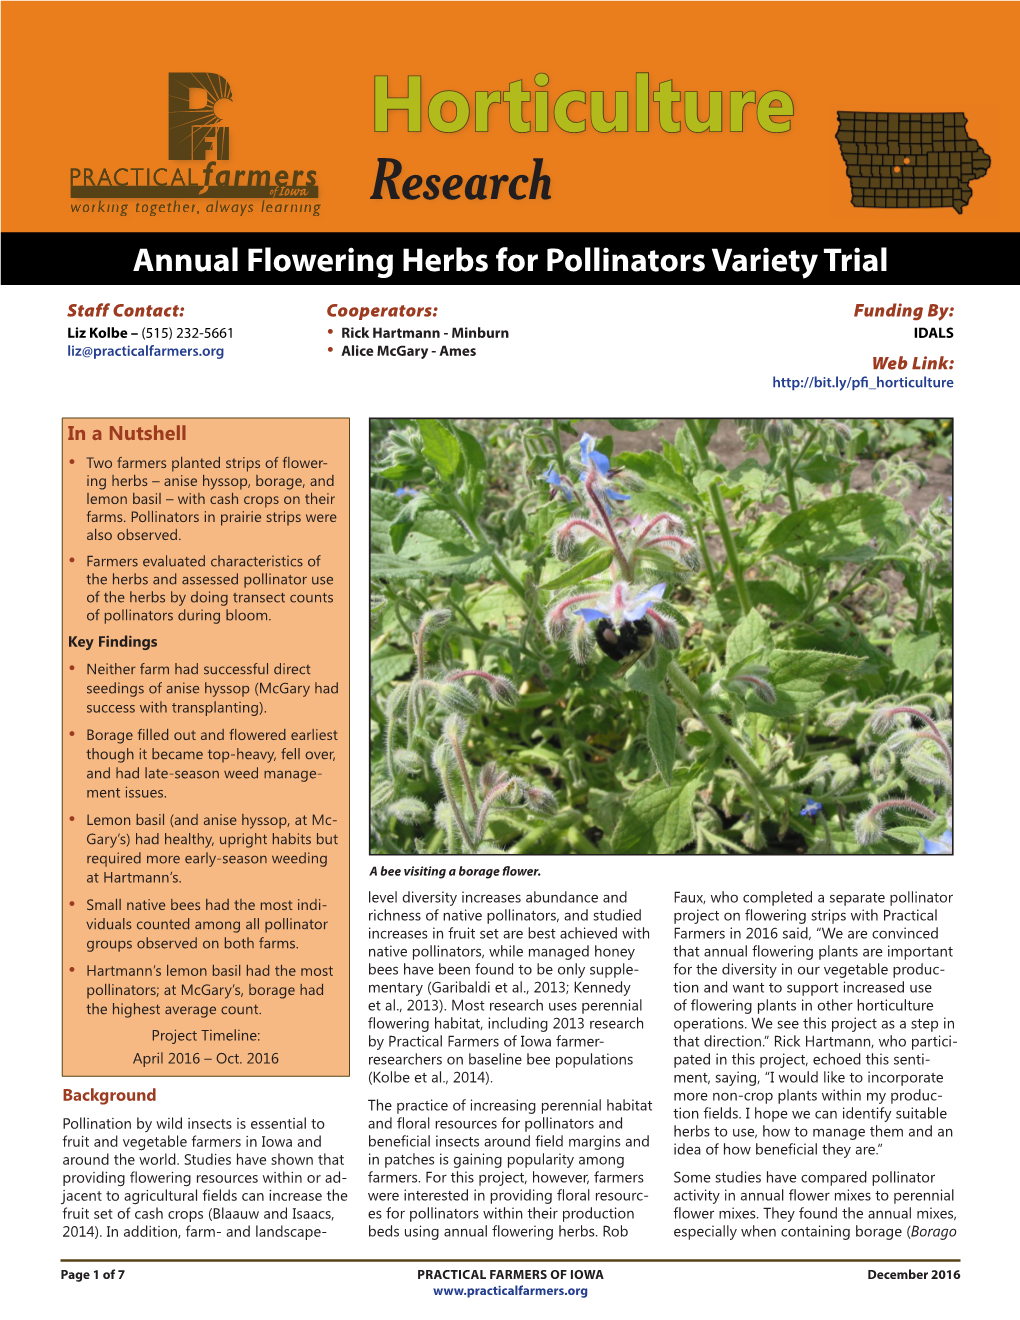 Horticulture Annual Flowering Herbs for Pollinators Variety Trial